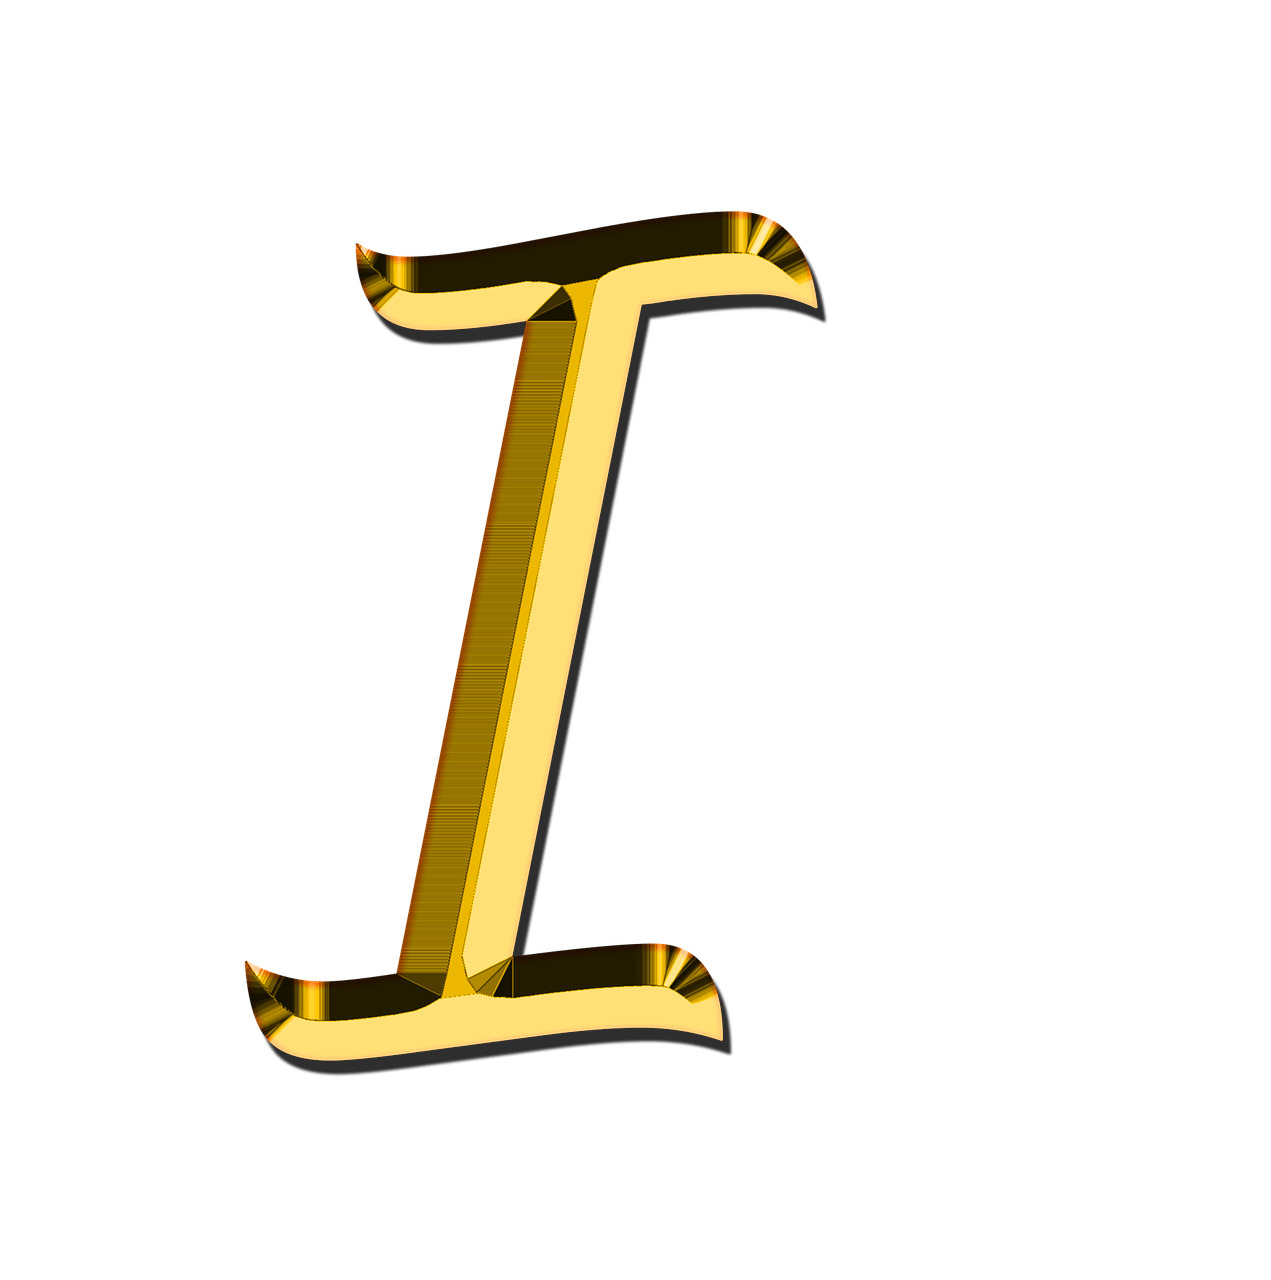 Capital Letter I icons